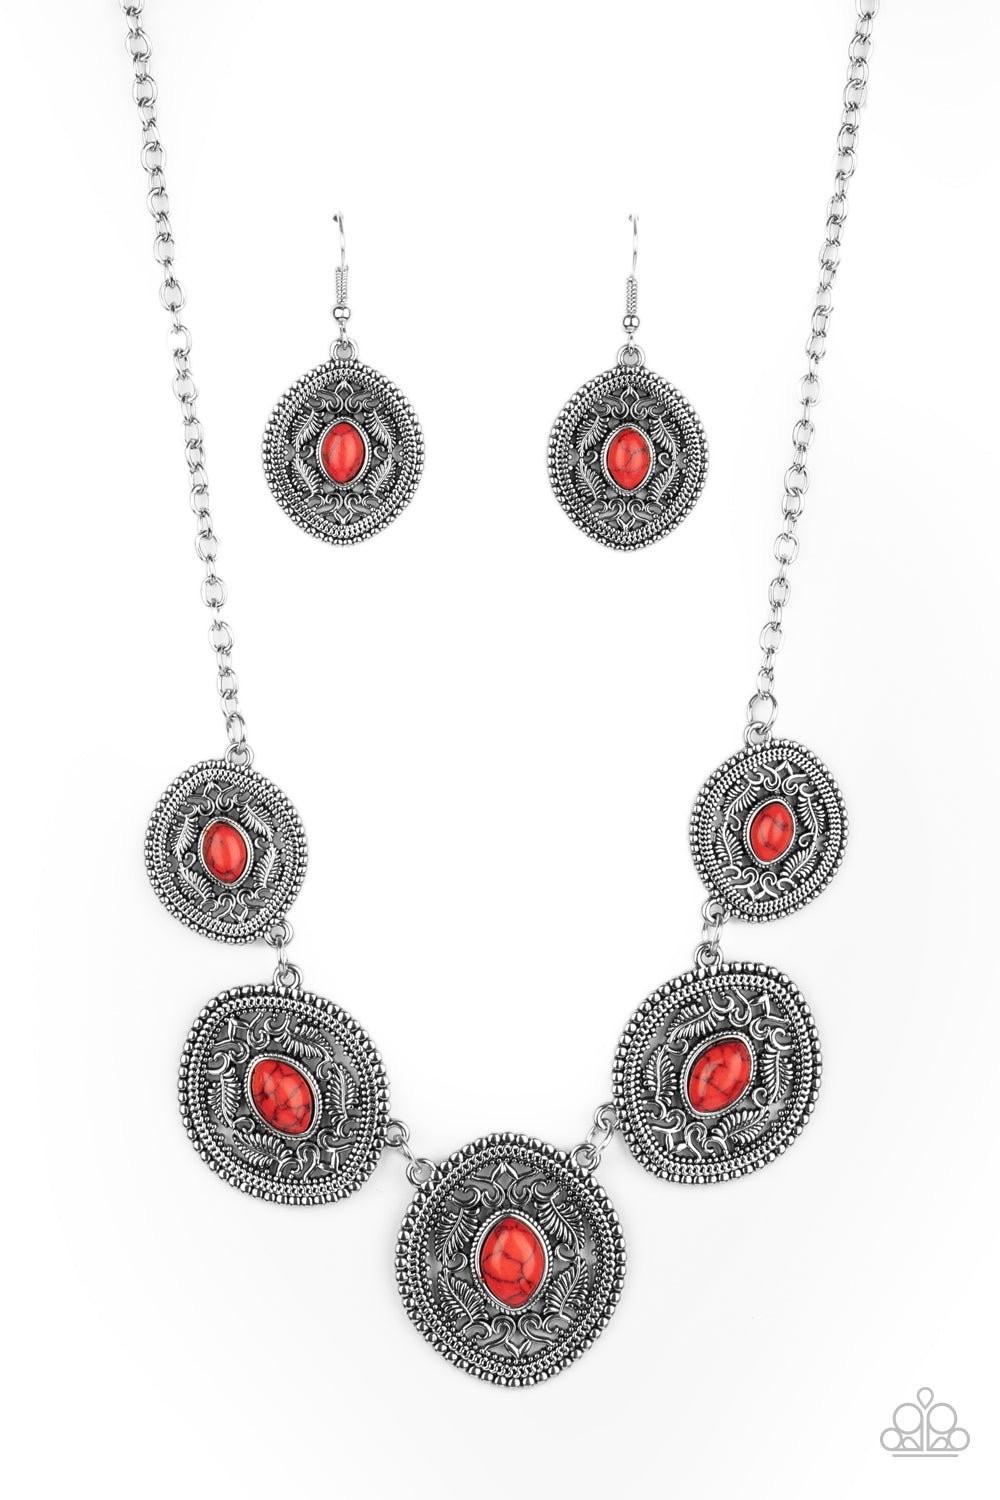 Alter ECO - Red and Silver Necklace - Paparazzi Jewelry - Bejeweled Accessories By Kristie - Dainty red stones dot the centers of leafy silver filigree filled frames that delicately connect below the collar, creating a colorfully earthy look. Features an adjustable clasp closure. 